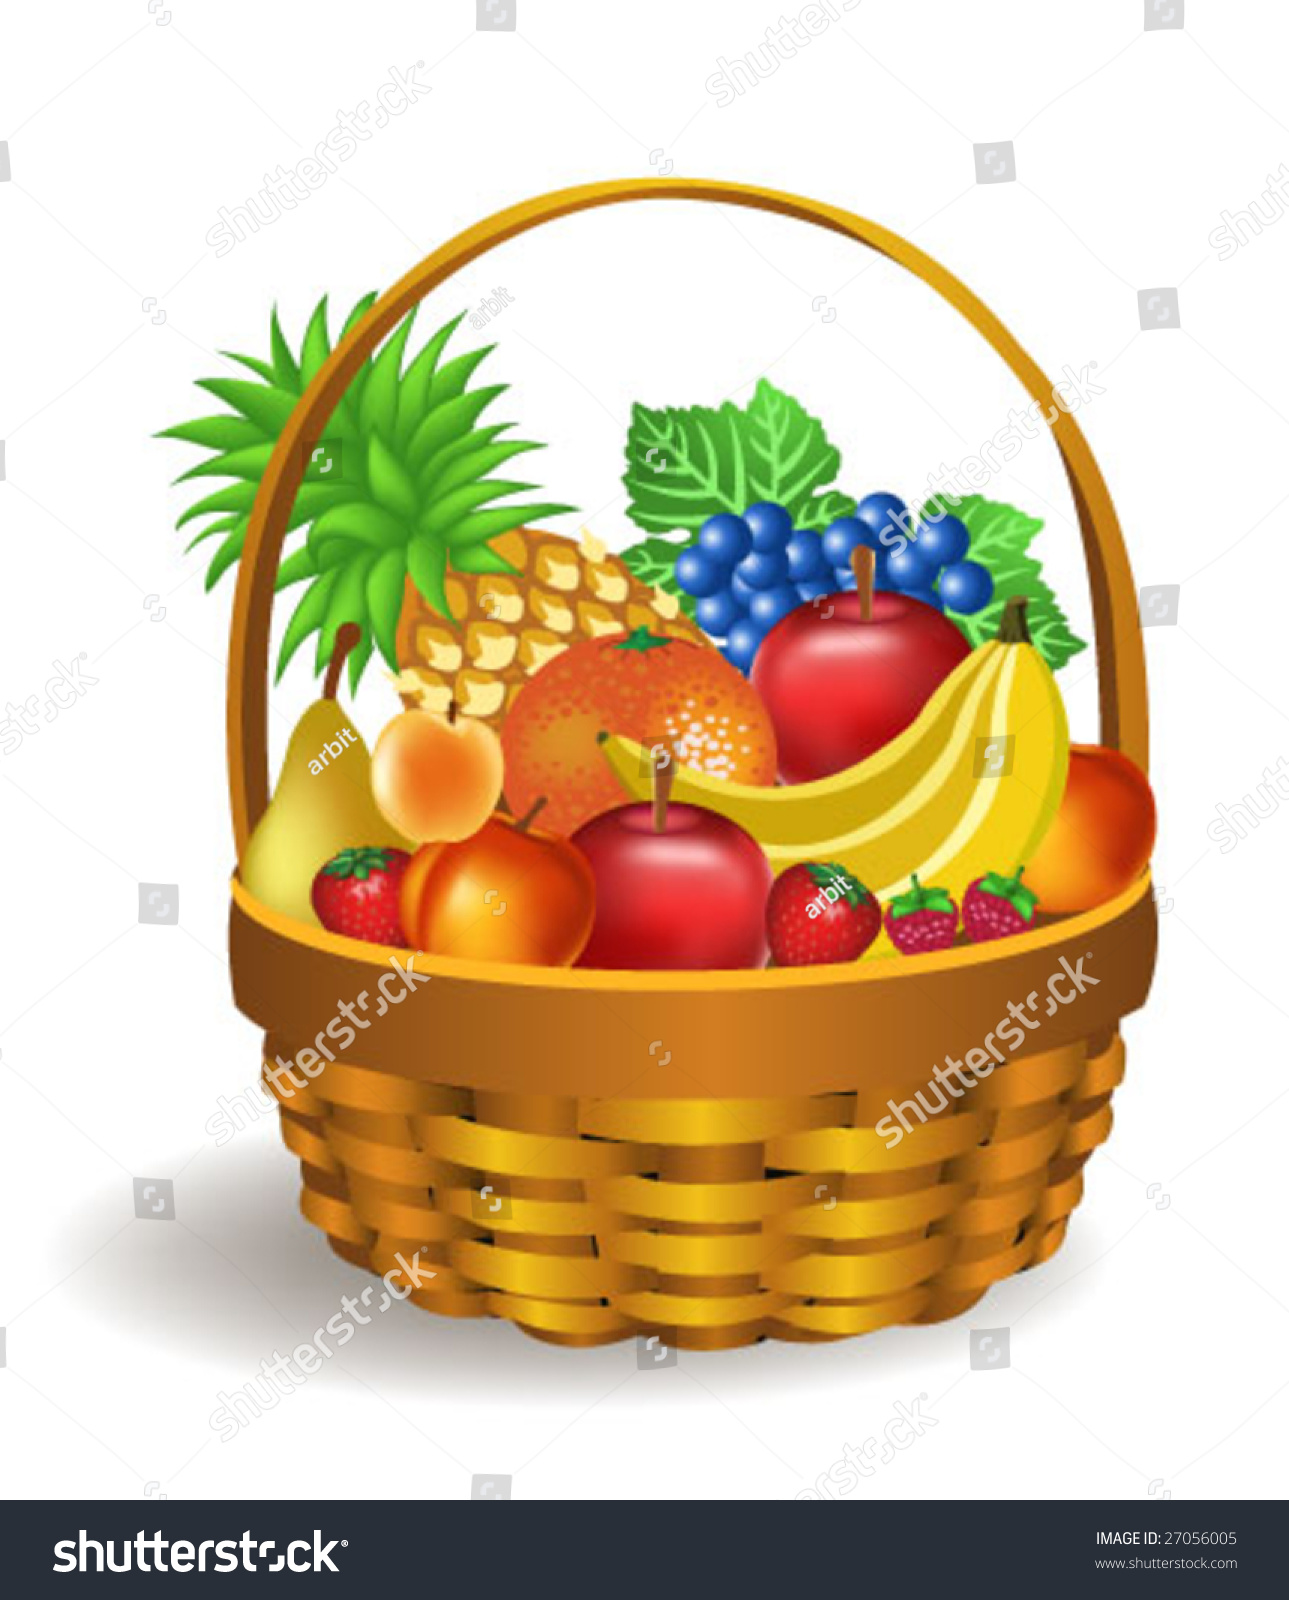 clipart basket of fruits - photo #39